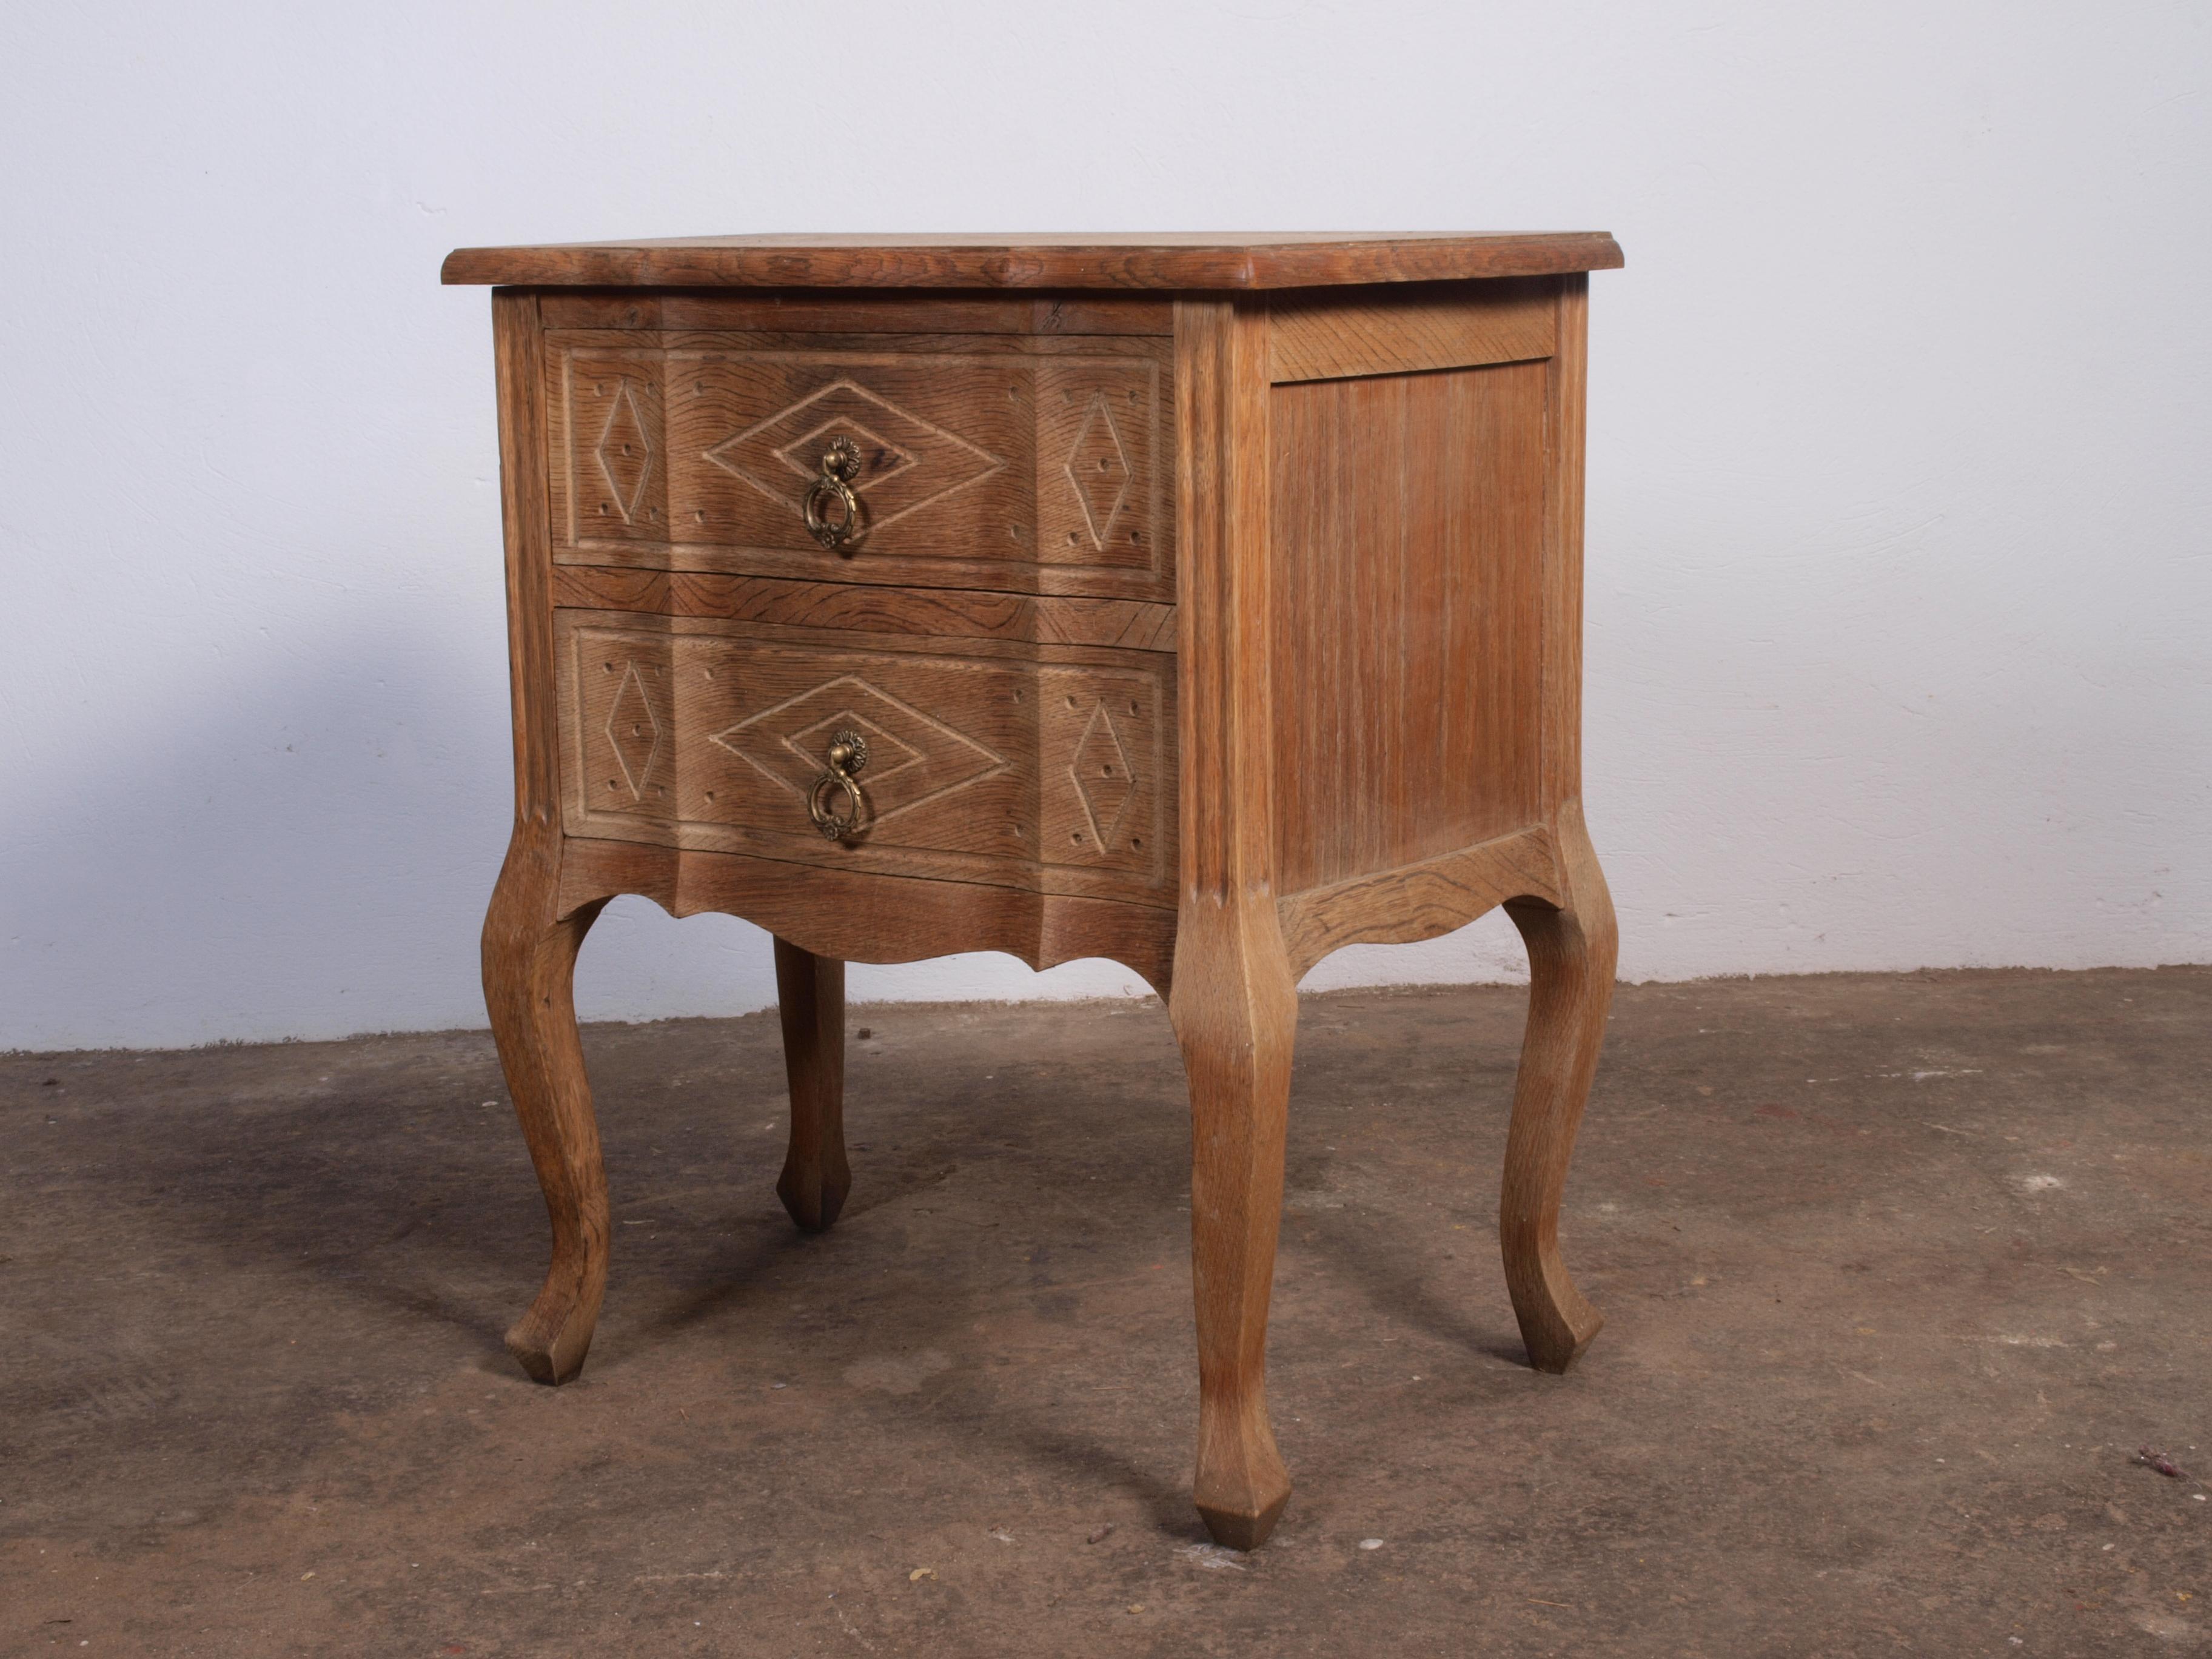 This small vintage Danish oak cabinet is in perfect working condition. It has a beautiful patina and strong lines, with simple and minimalistic design. The legs have an outgoing curve reminiscent of French design, while the wood carvings on the